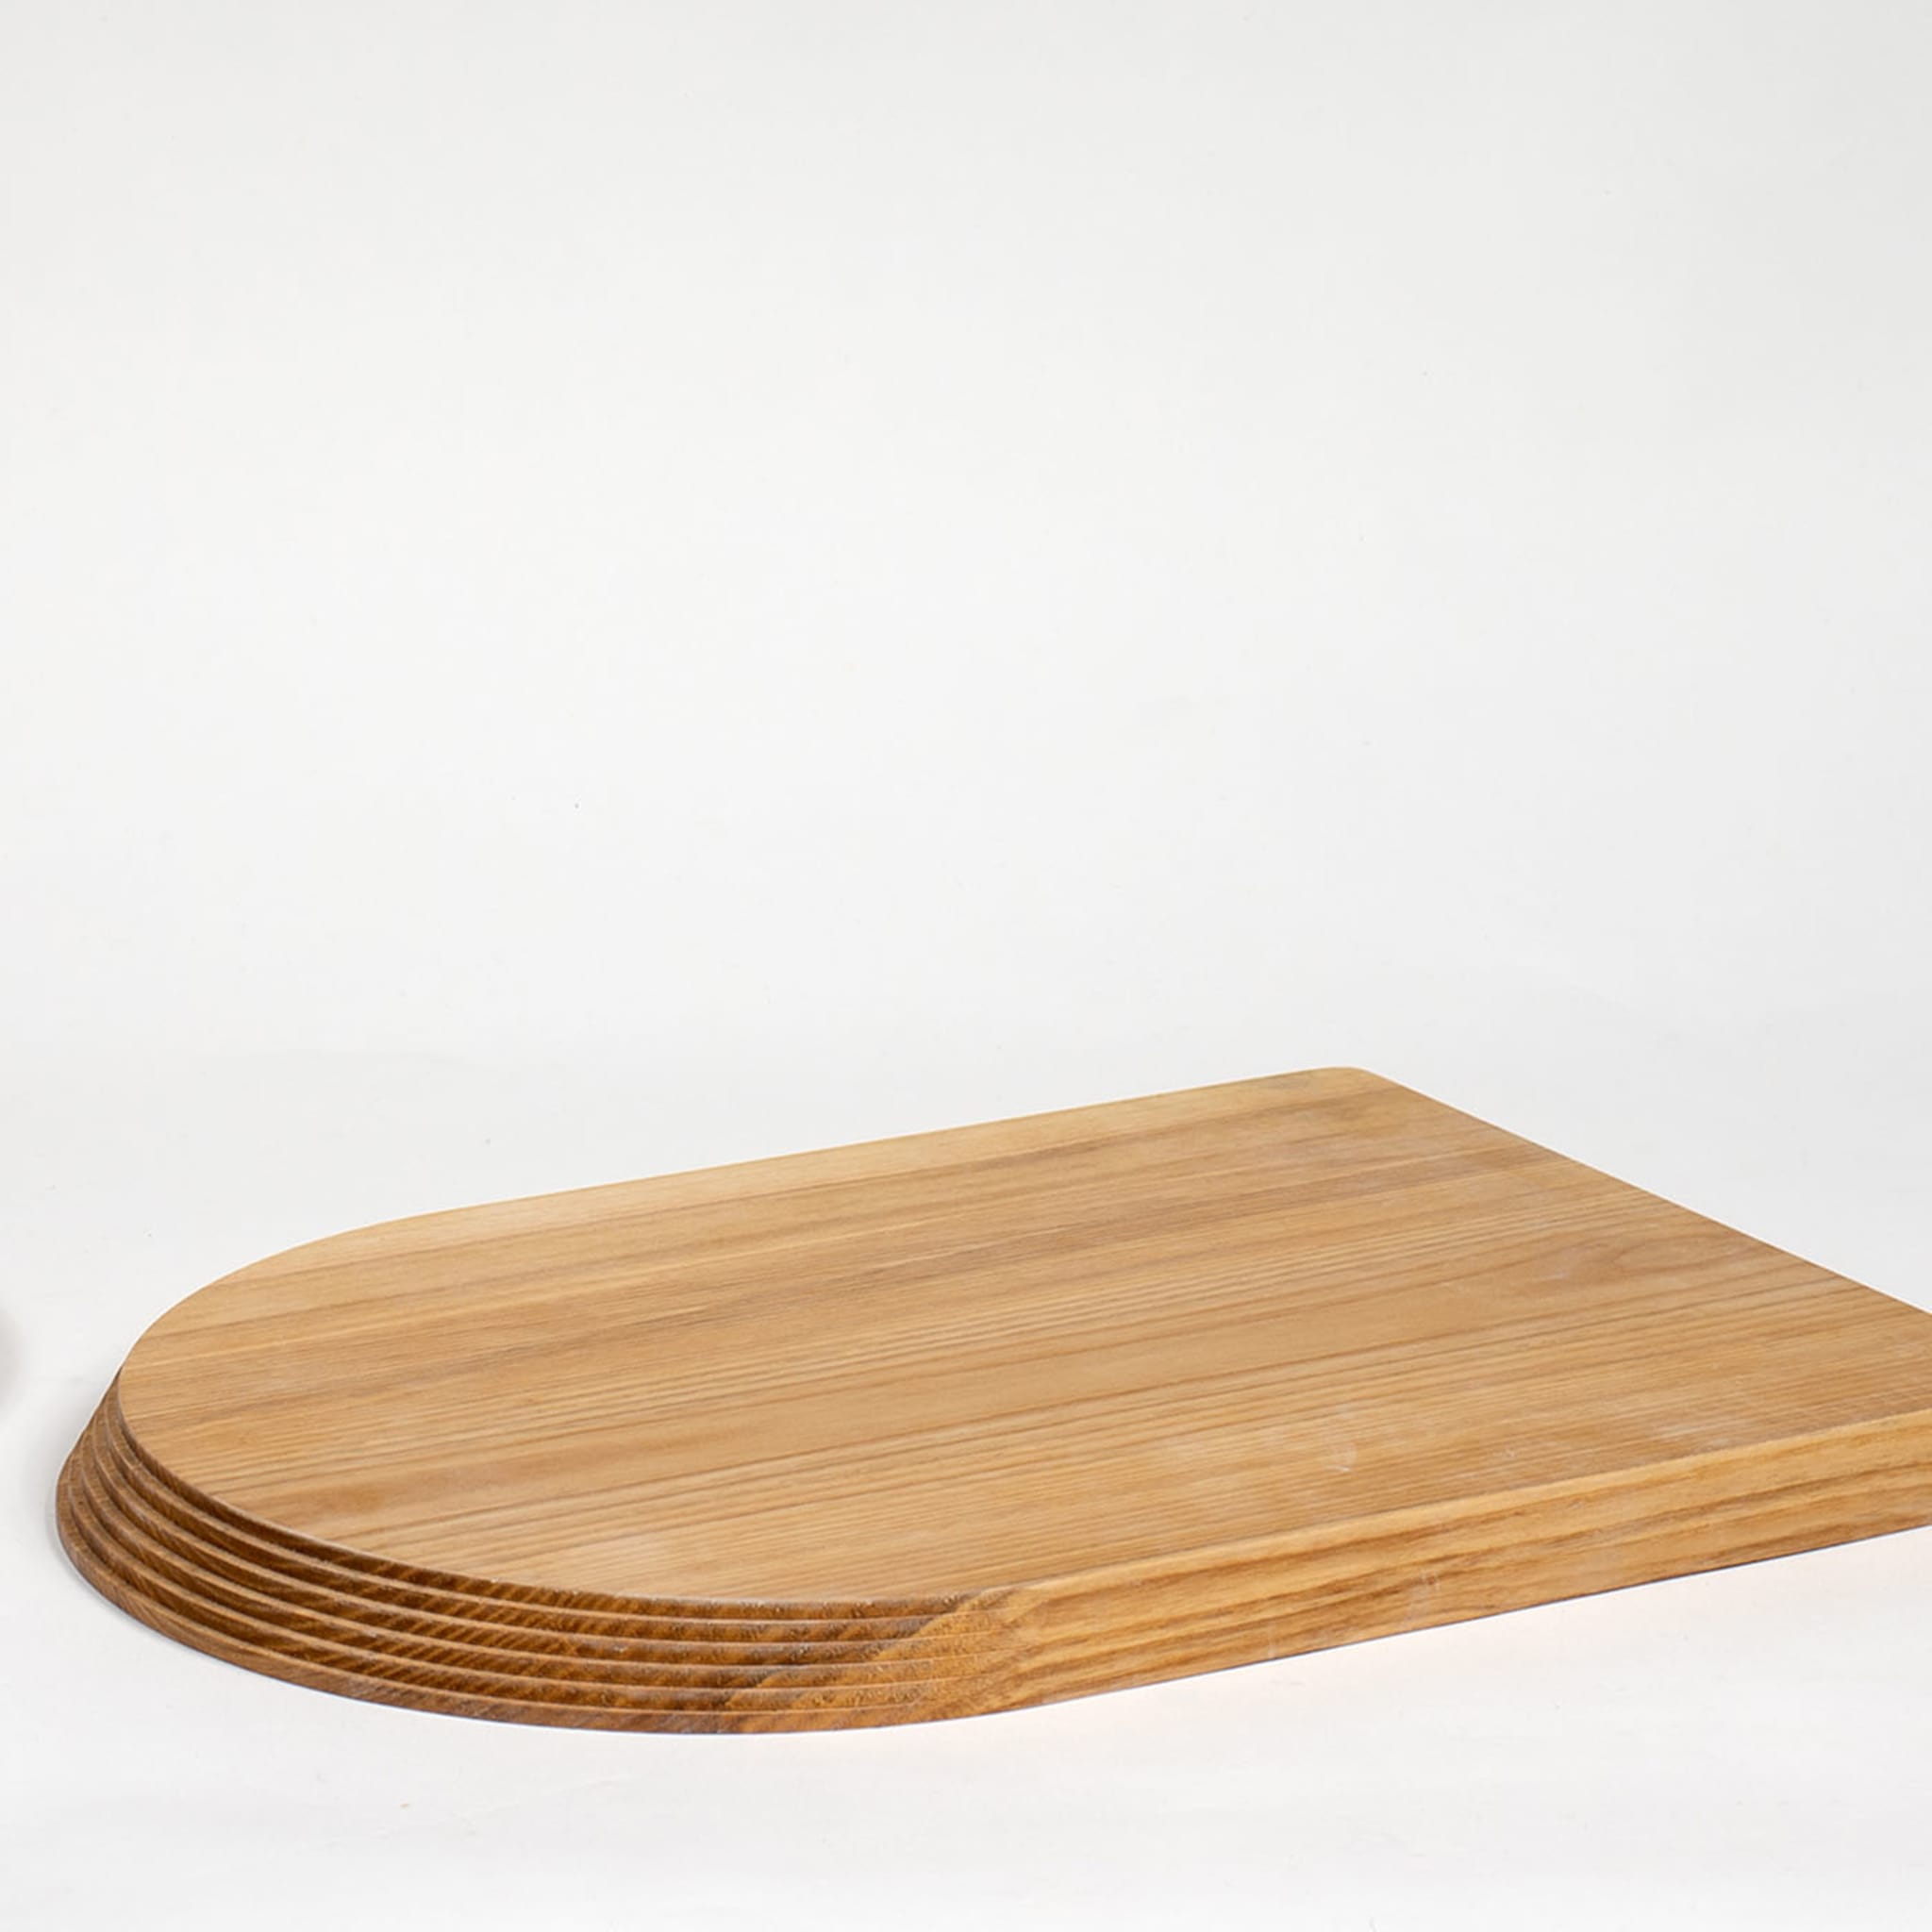 Tagliere Wood and Marble Cutting Board - Alternative view 1